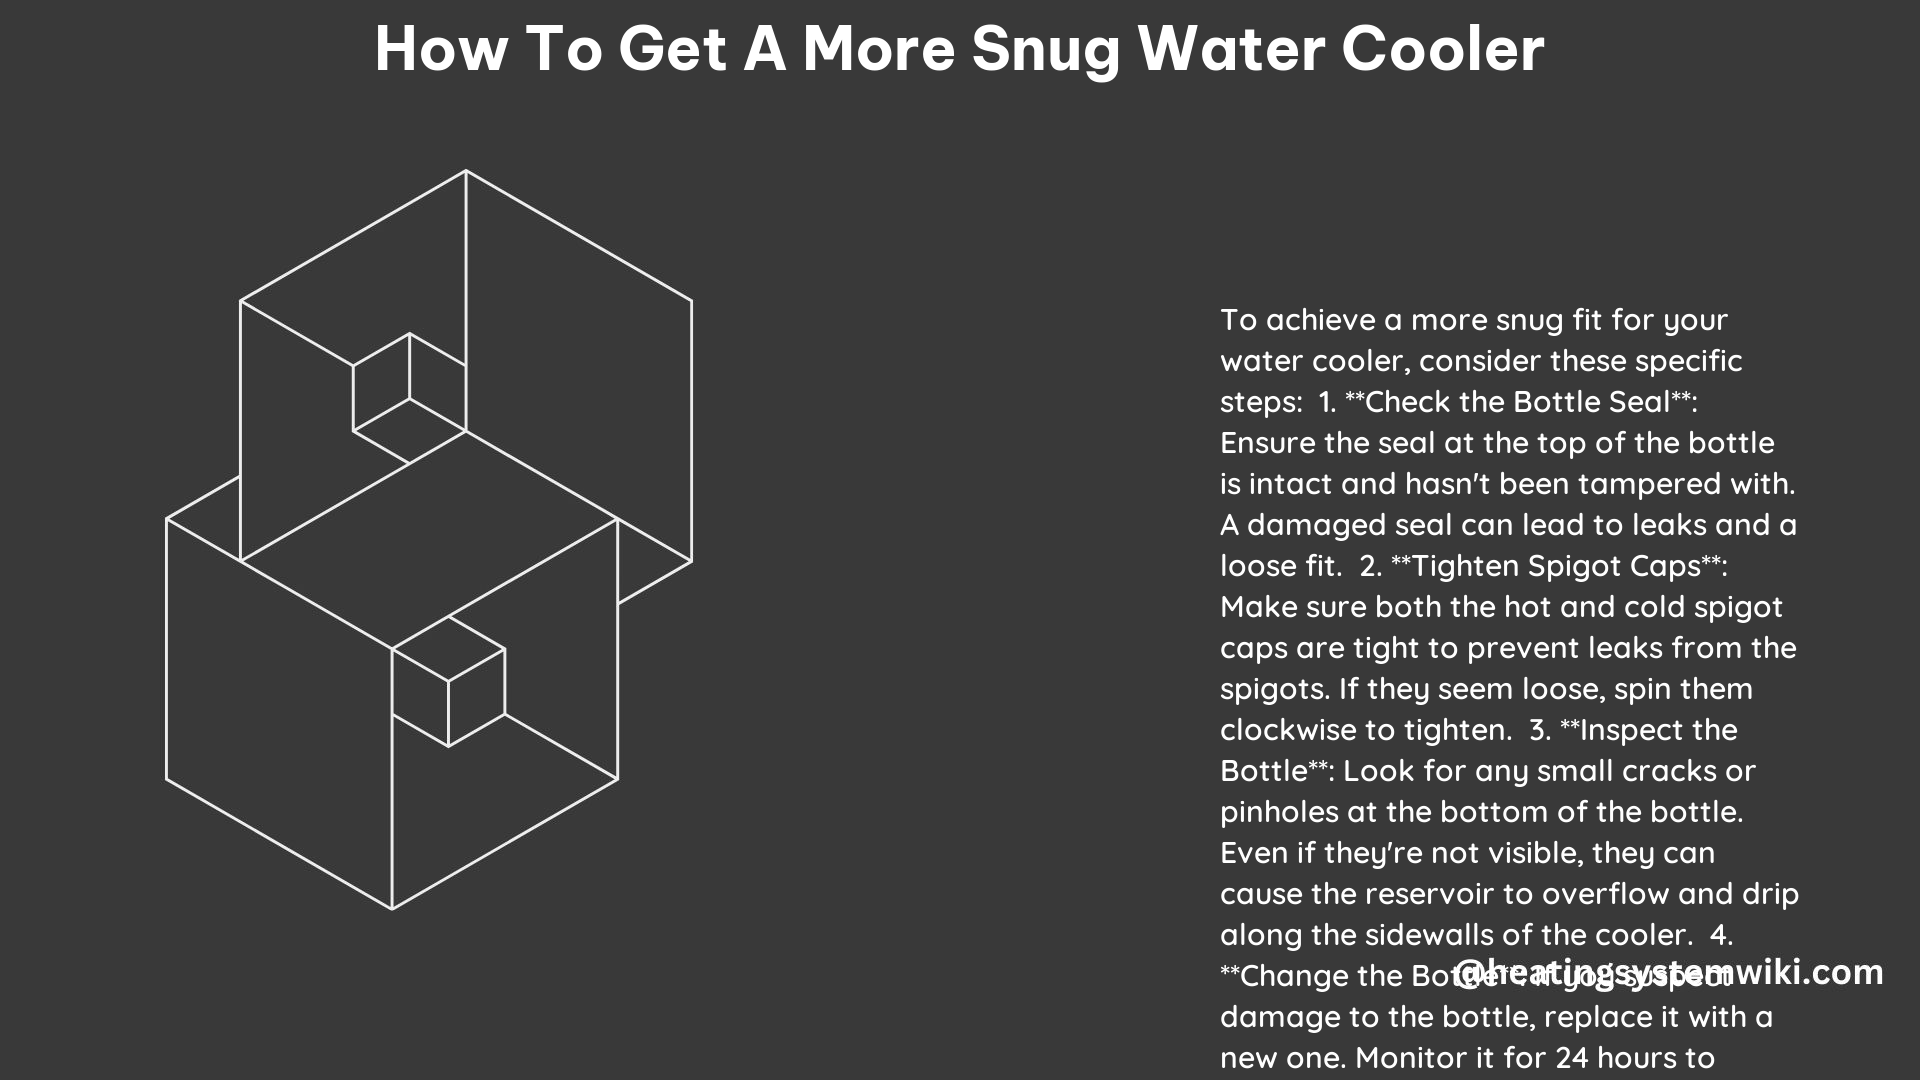 How to Get a More Snug Water Cooler